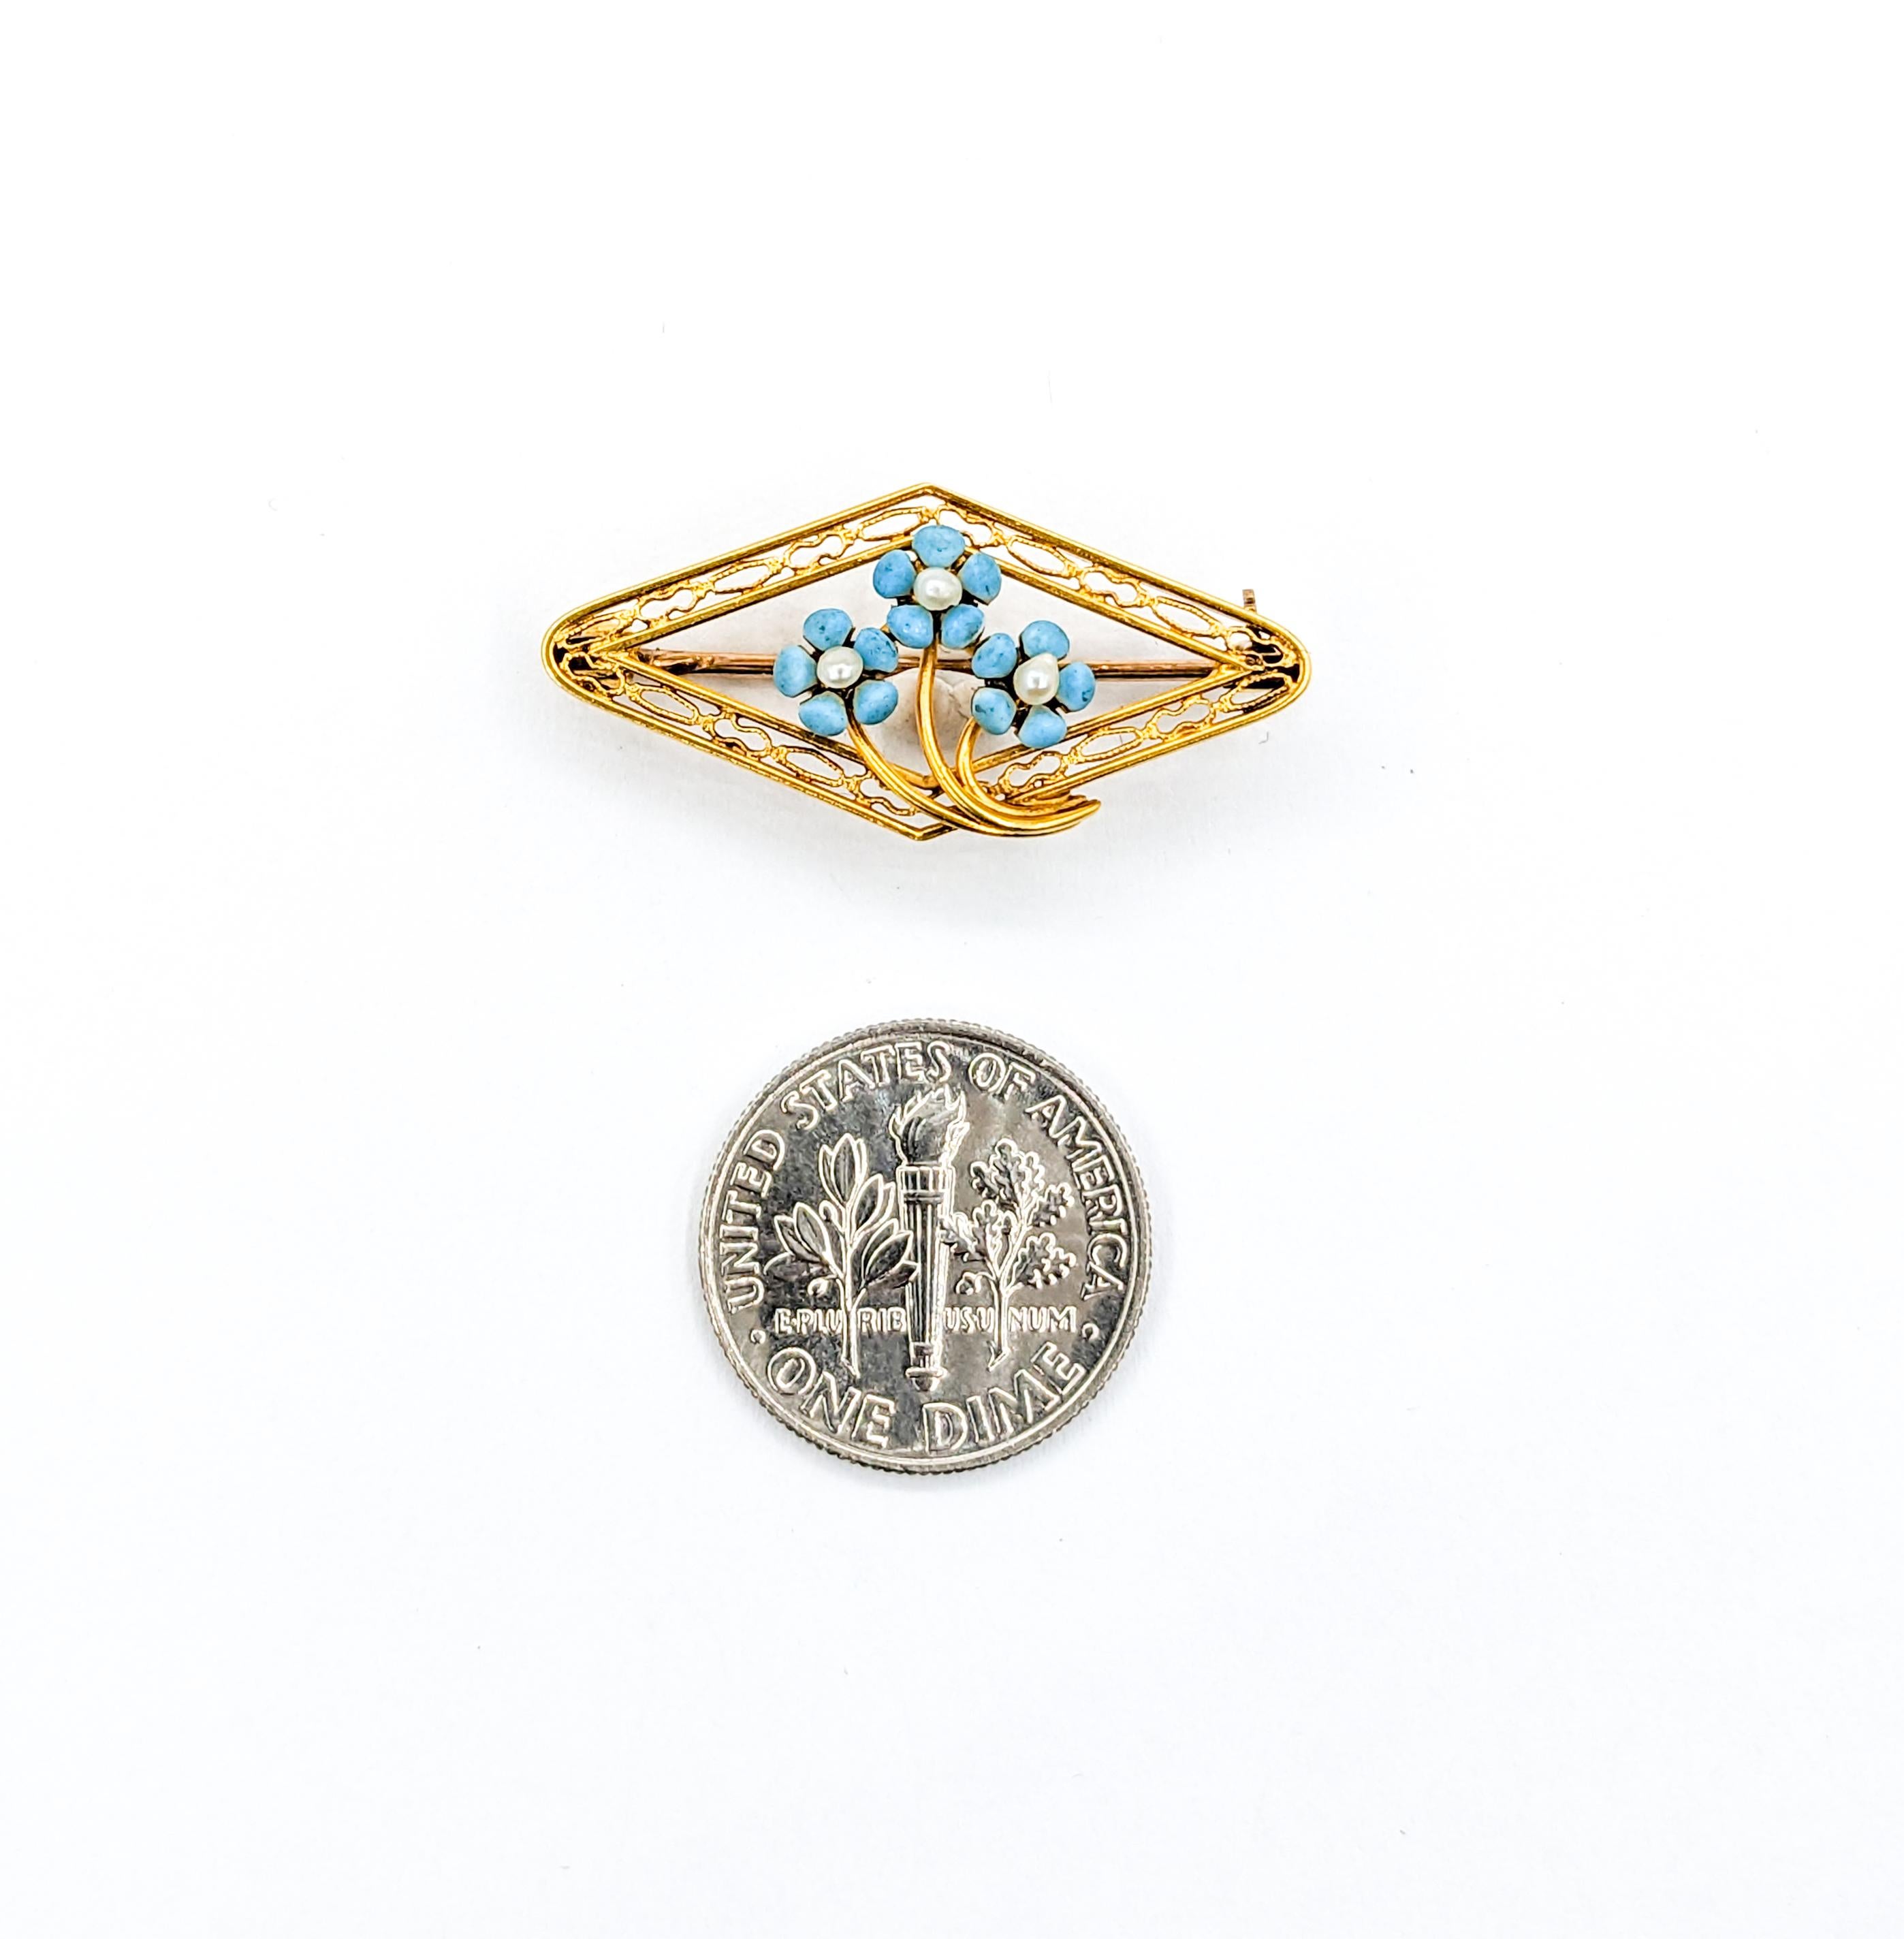 Sweet Turquoise Enamel & Seed Pearl Pin Brooch

Step back in time with our antique floral pin, a piece that encapsulates ageless charm. Skillfully wrought in 10k yellow gold, this brooch is adorned with radiant pearls, shimmering with beautiful